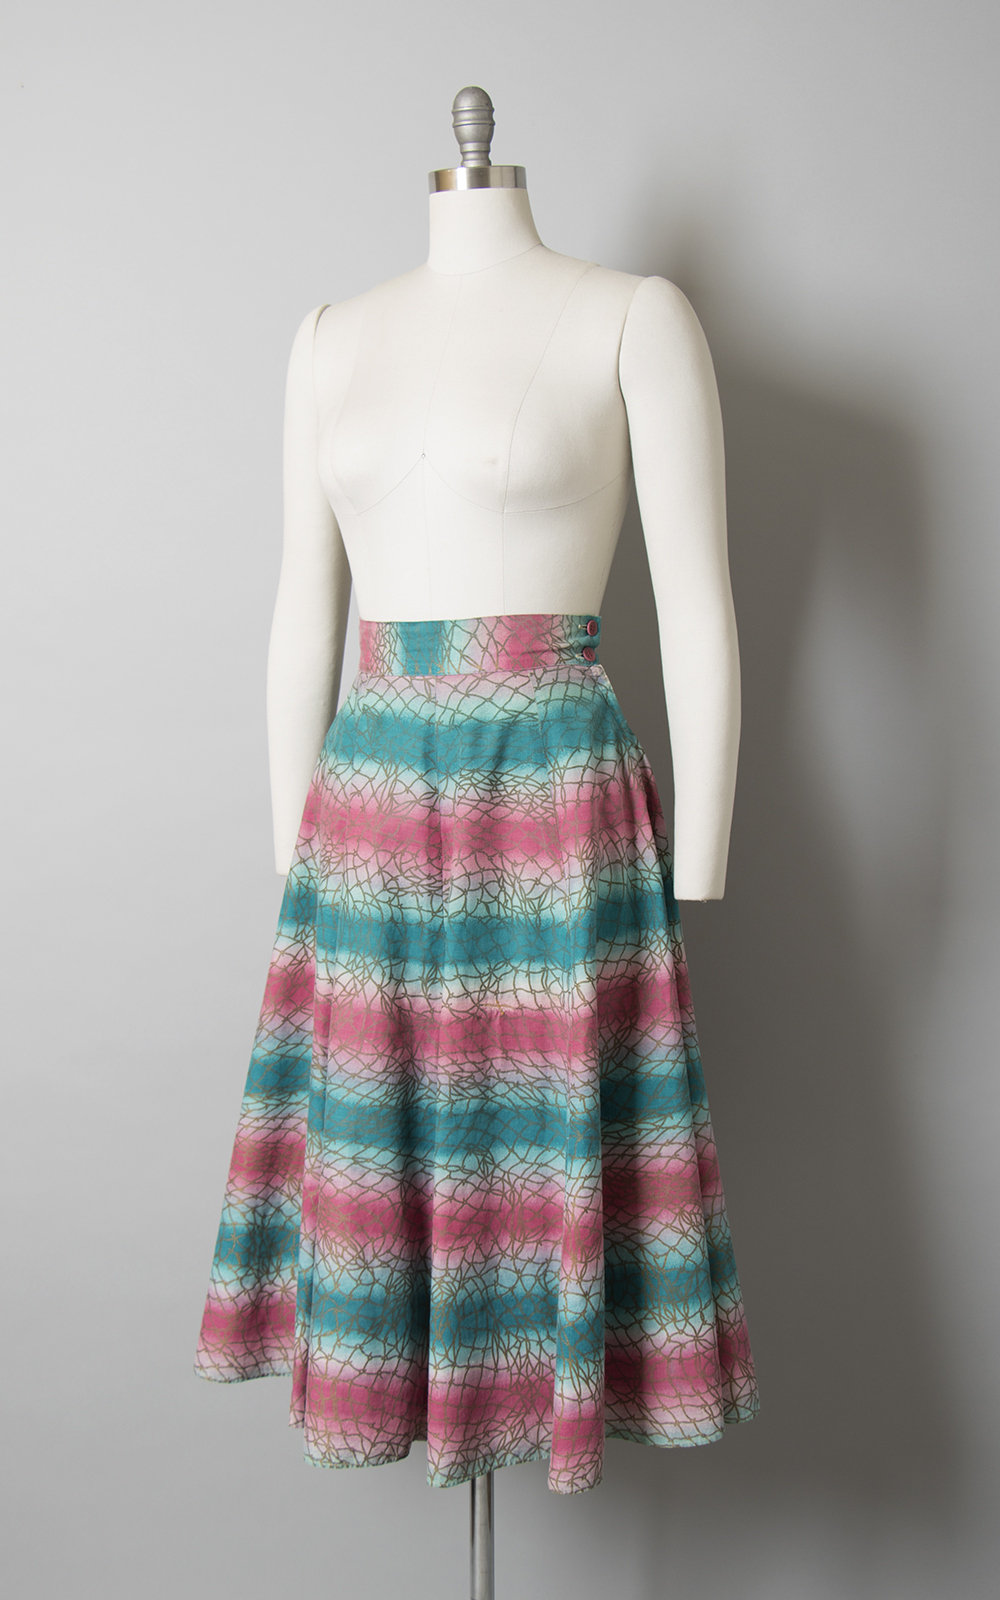 Vintage 1940s 1950s Skirt | 40s 50s Ombré Striped Cotton Pink Teal Metallic Gold Printed Full Swing Skirt (small)